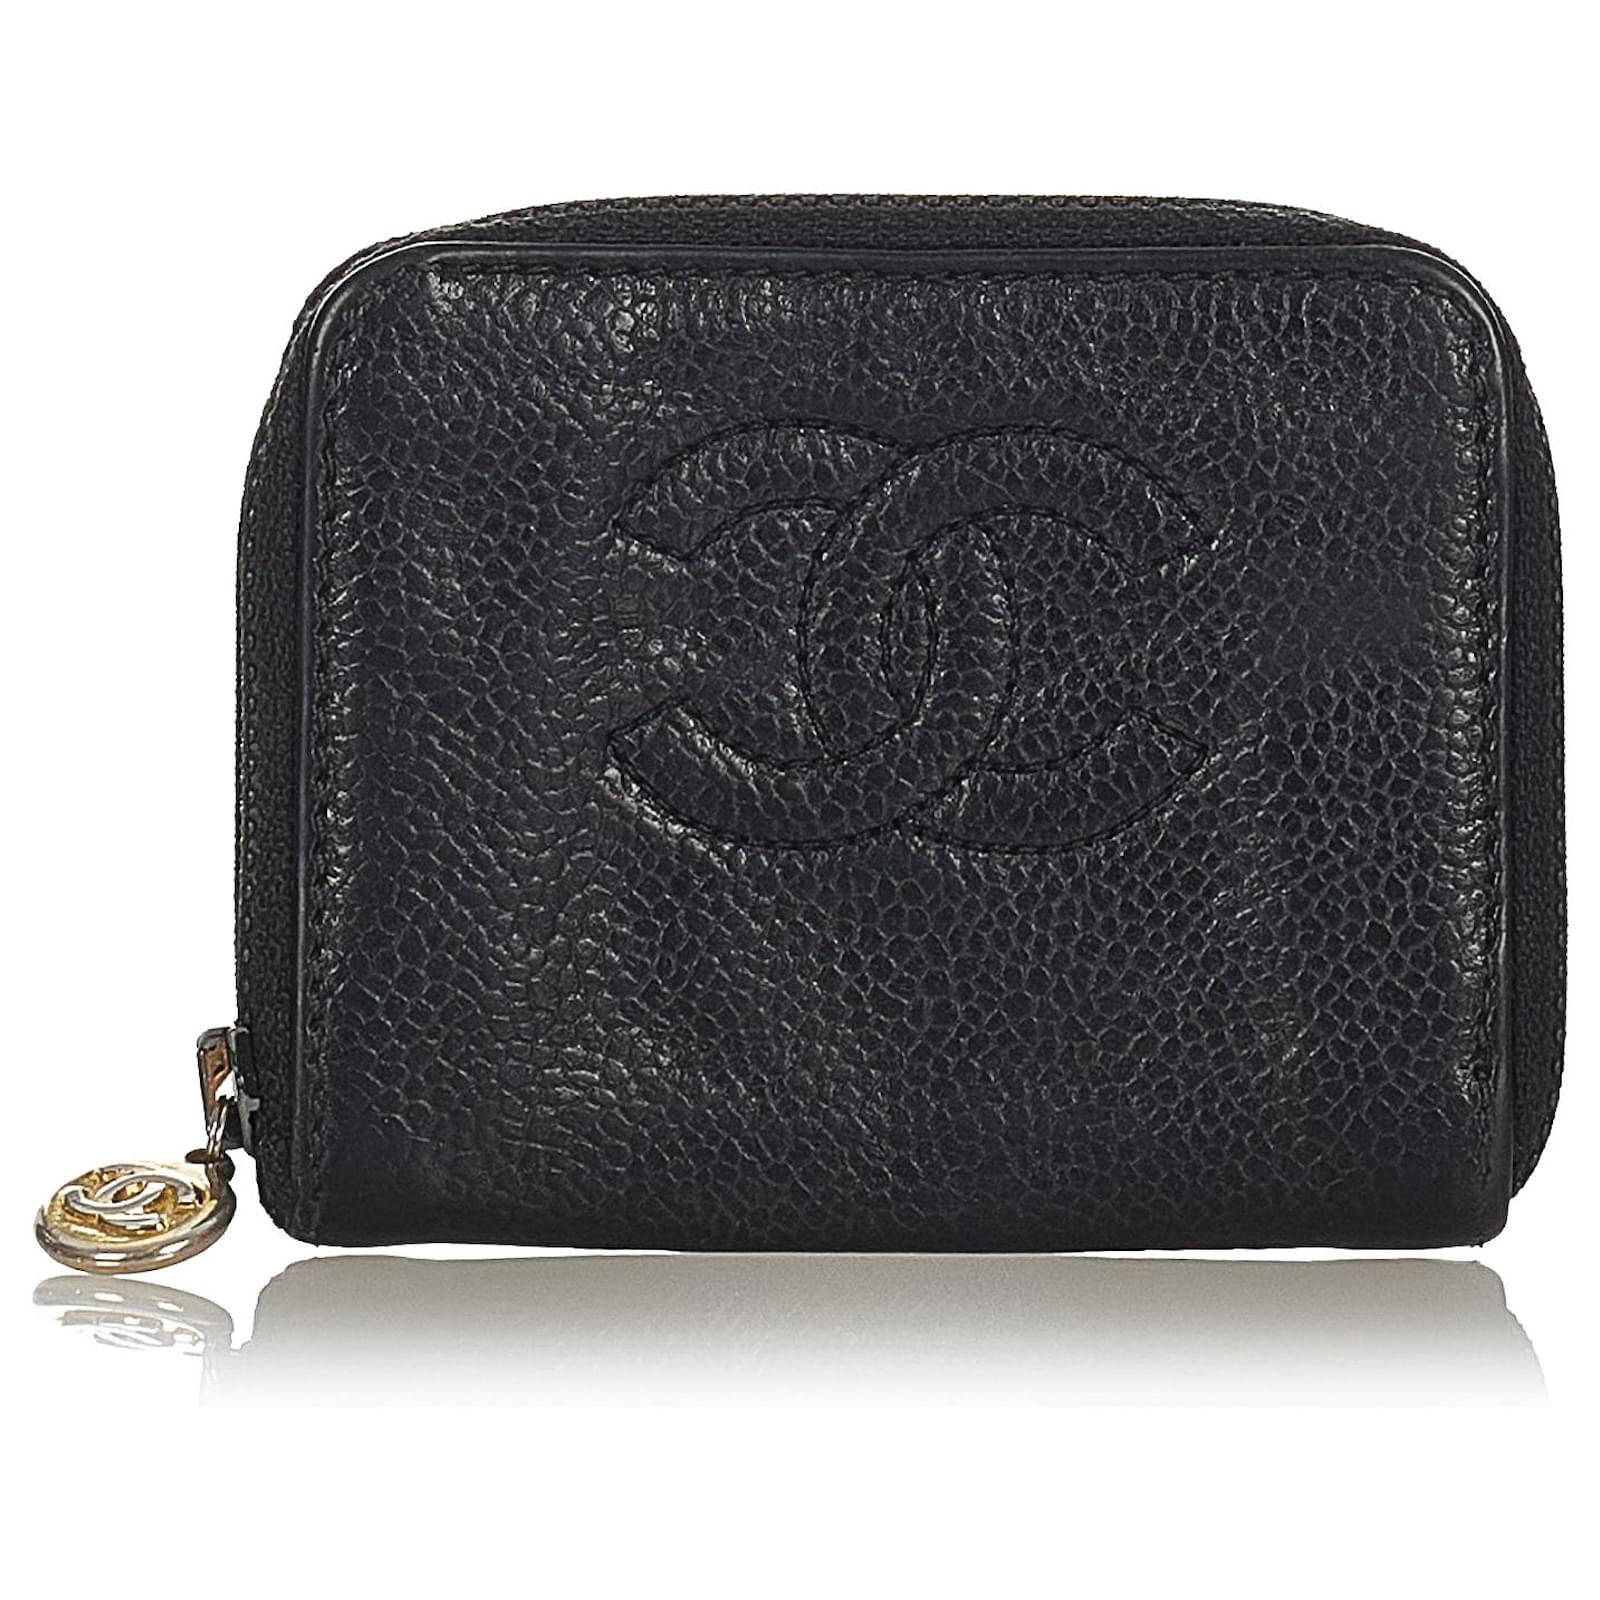 Chanel Black Leather Small Timeless CC Zip Coin Purse Chanel